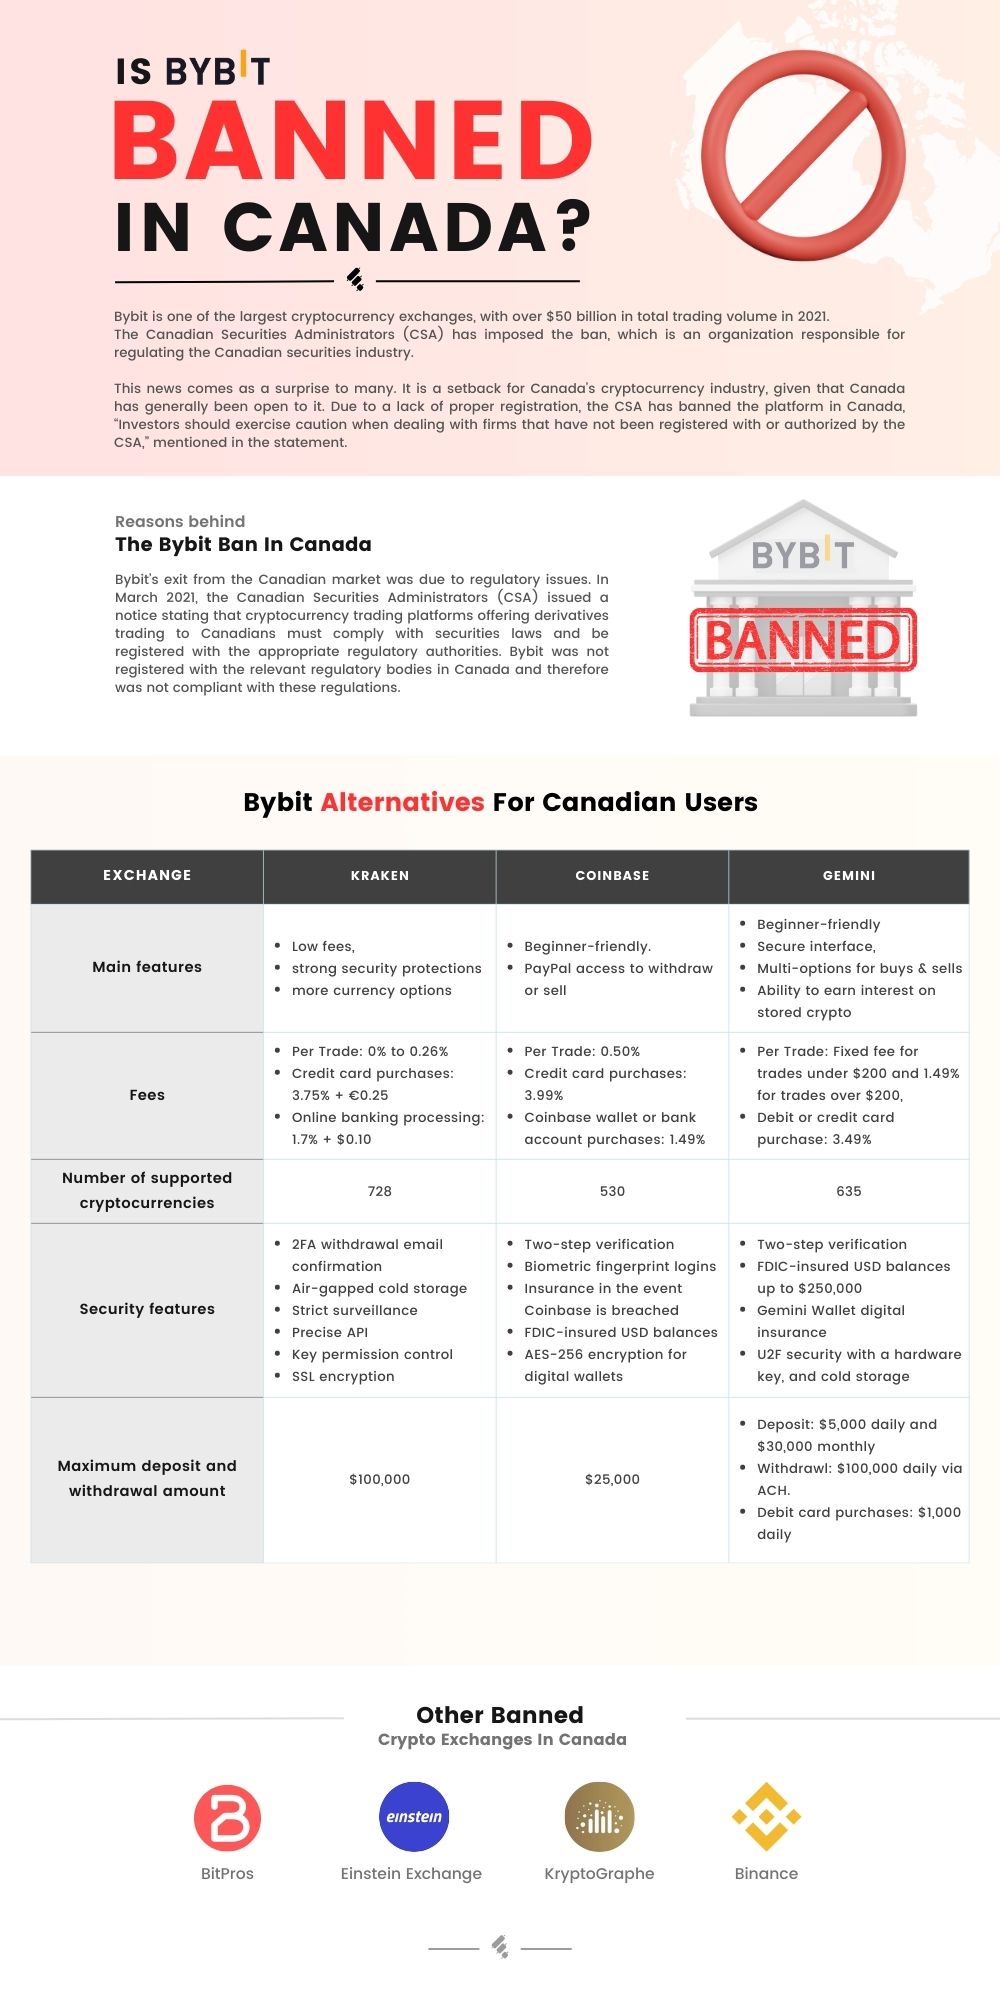 Is Bybit Banned in Canada Infographic